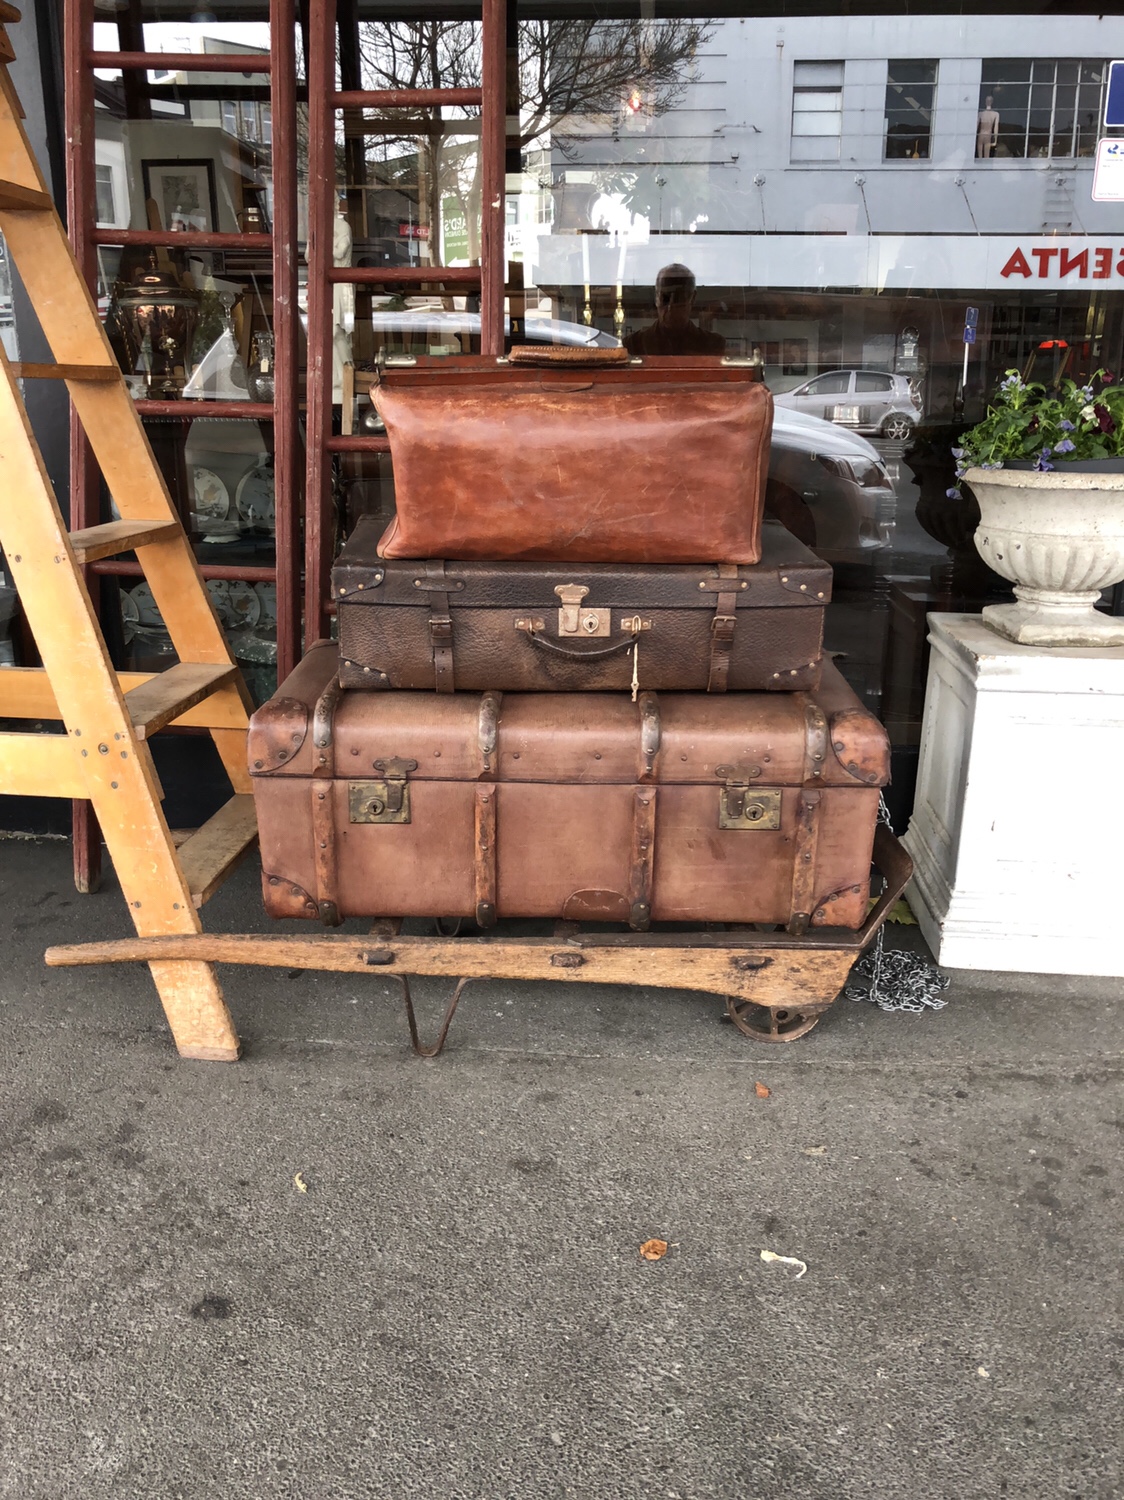 100. A SELECTION OF VINTAGE LUGGAGE.